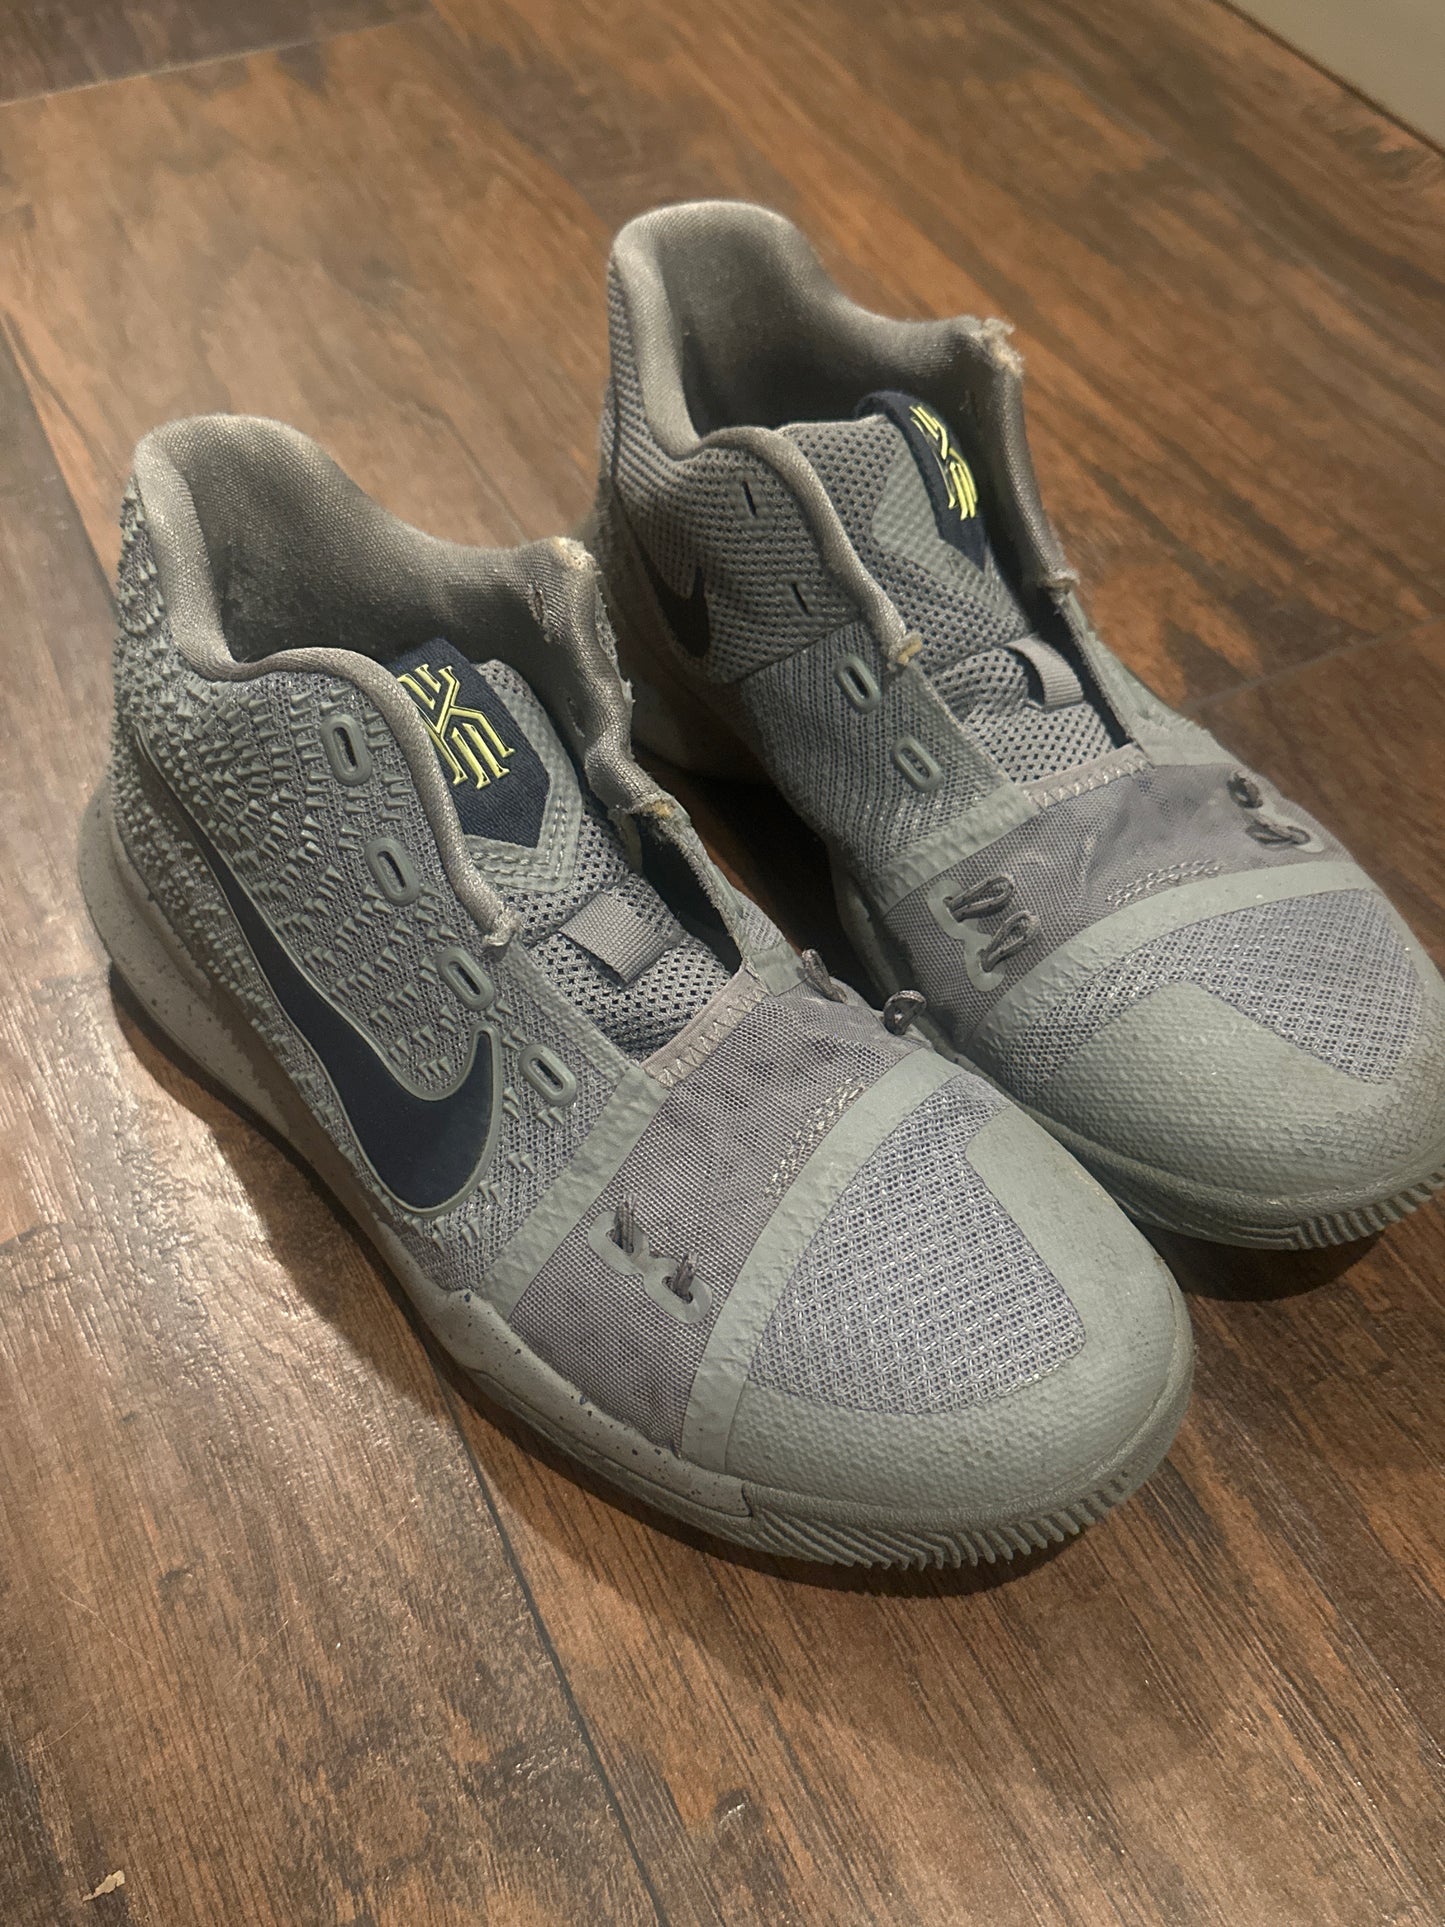 Size 5Y Boys Kyrie Irving Basketball shoes (just needs laces)